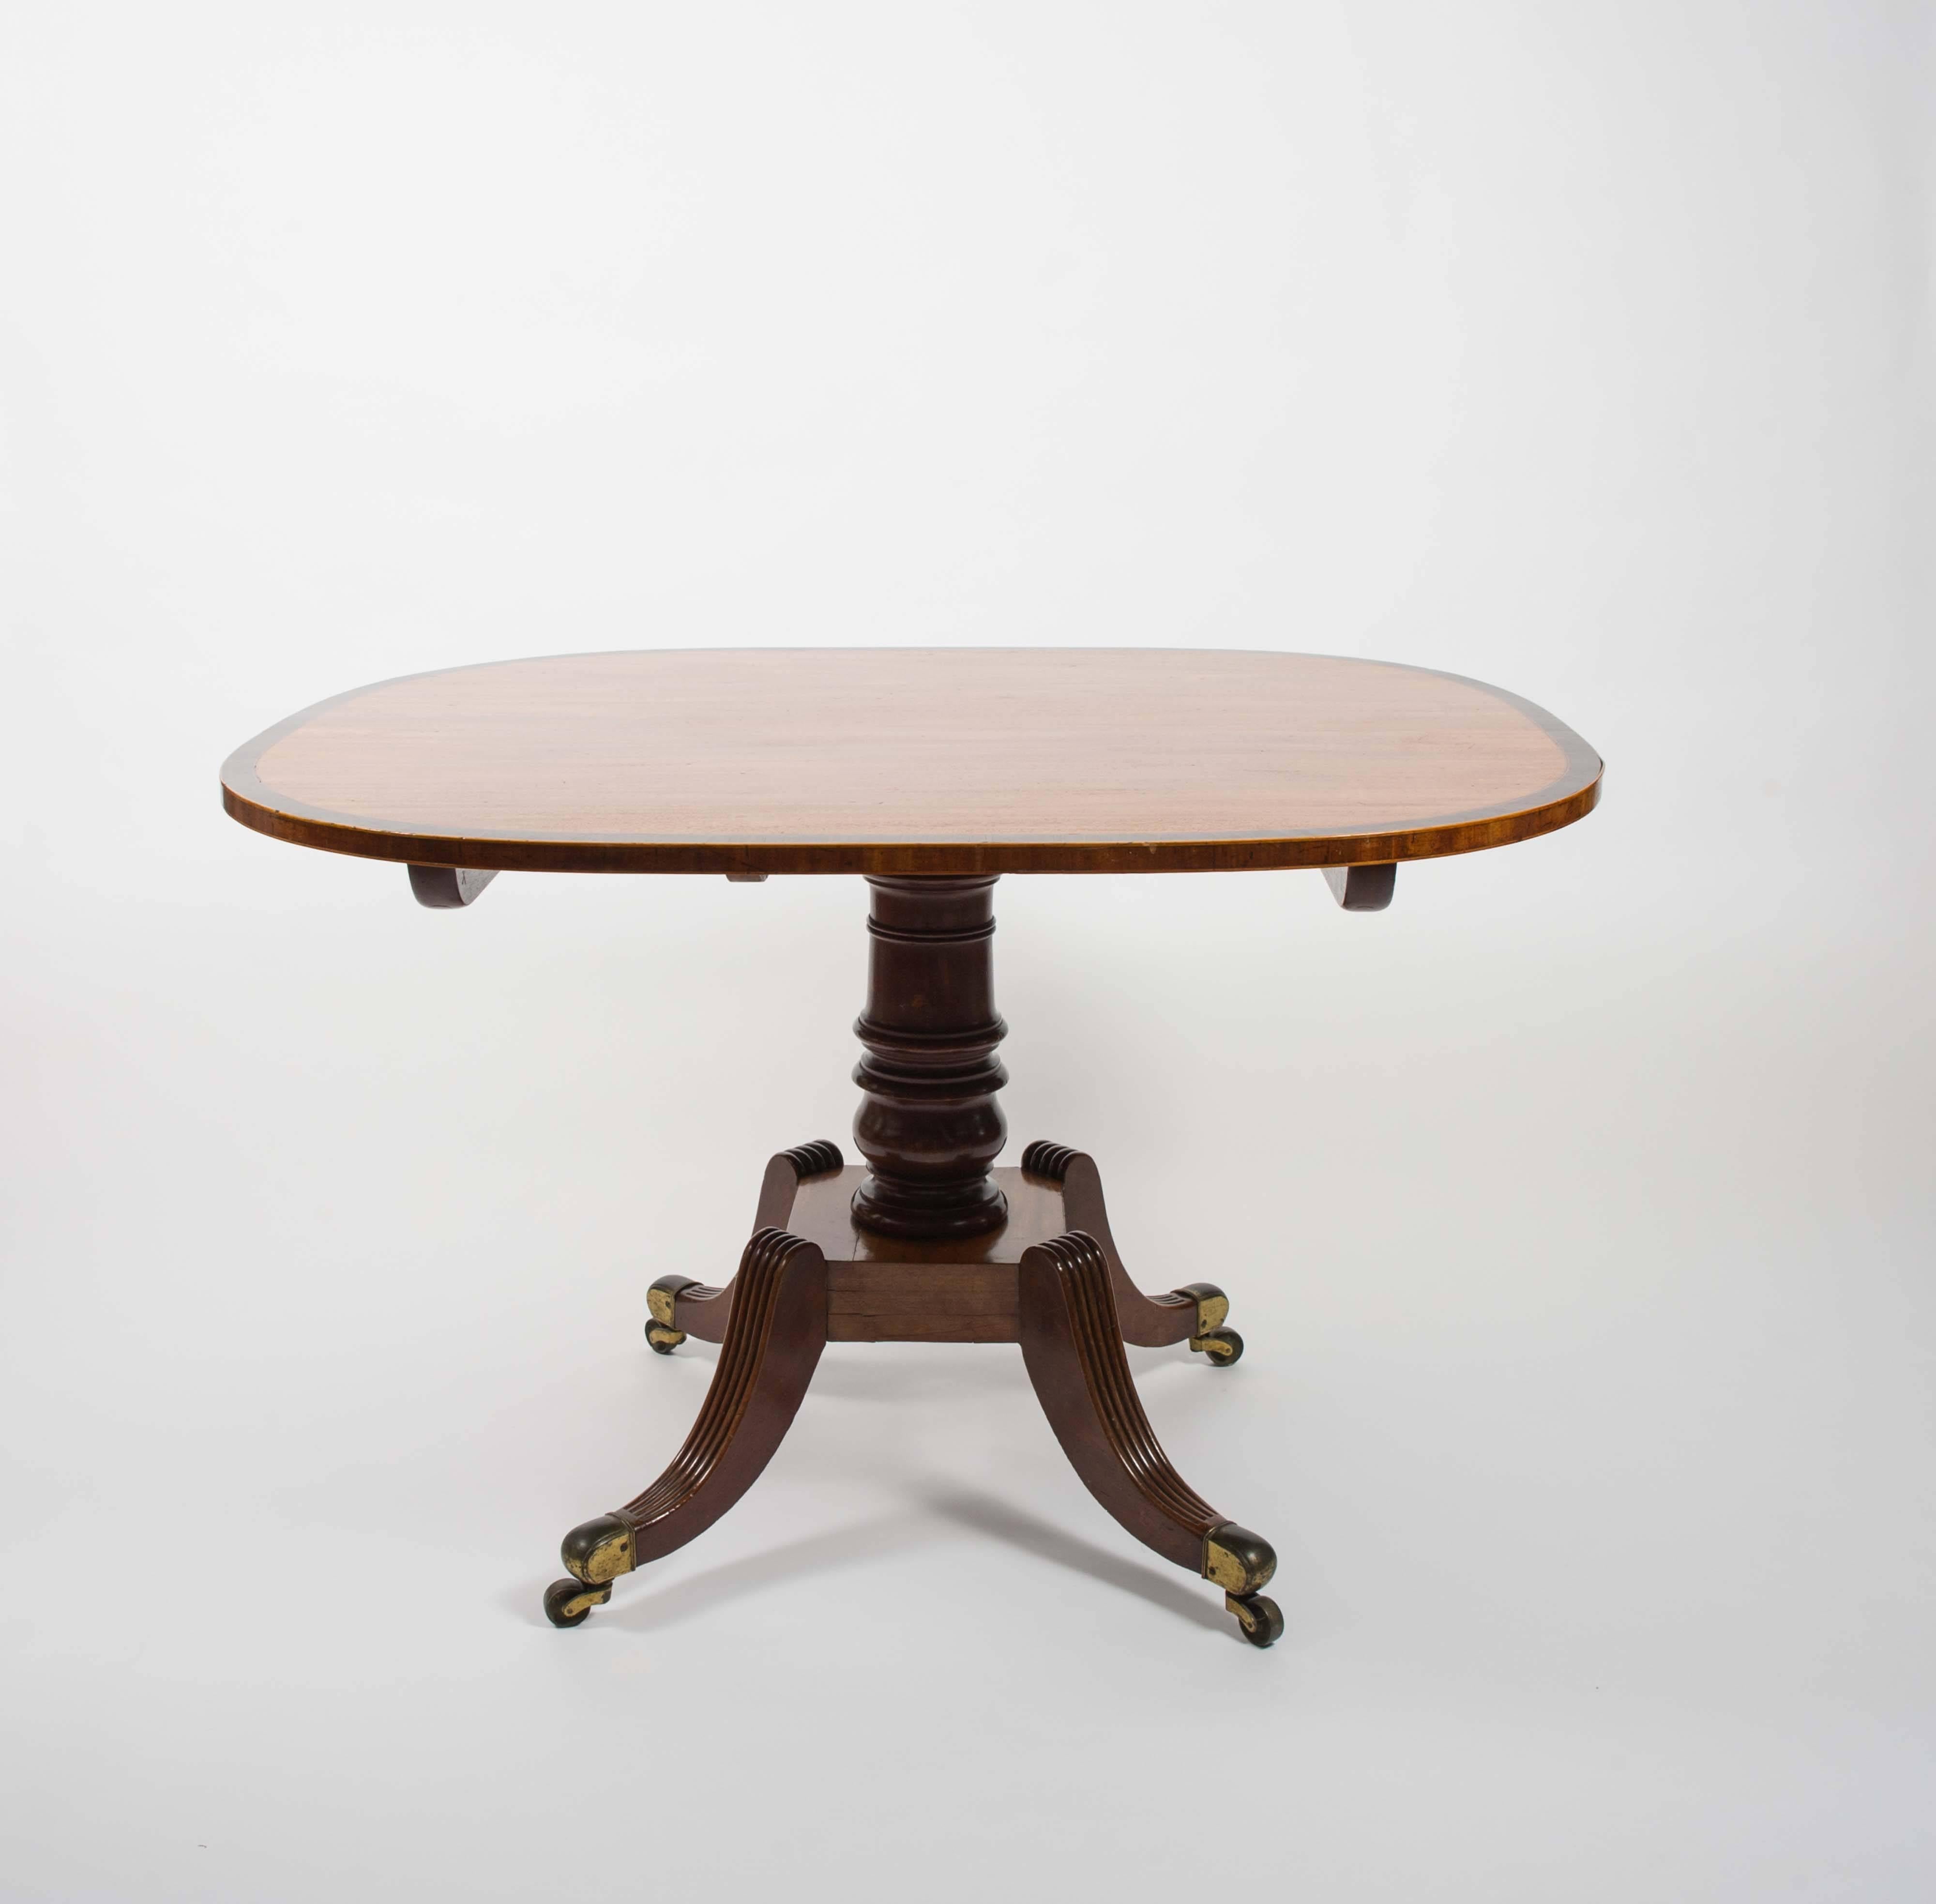 This very attractive and versatile sized English mahogany Regency tilt-top breakfast table features a lovely rosewood crossbanding border with a rectangular shaped top and rounded corners. The table is supported on a central column and Quadra form